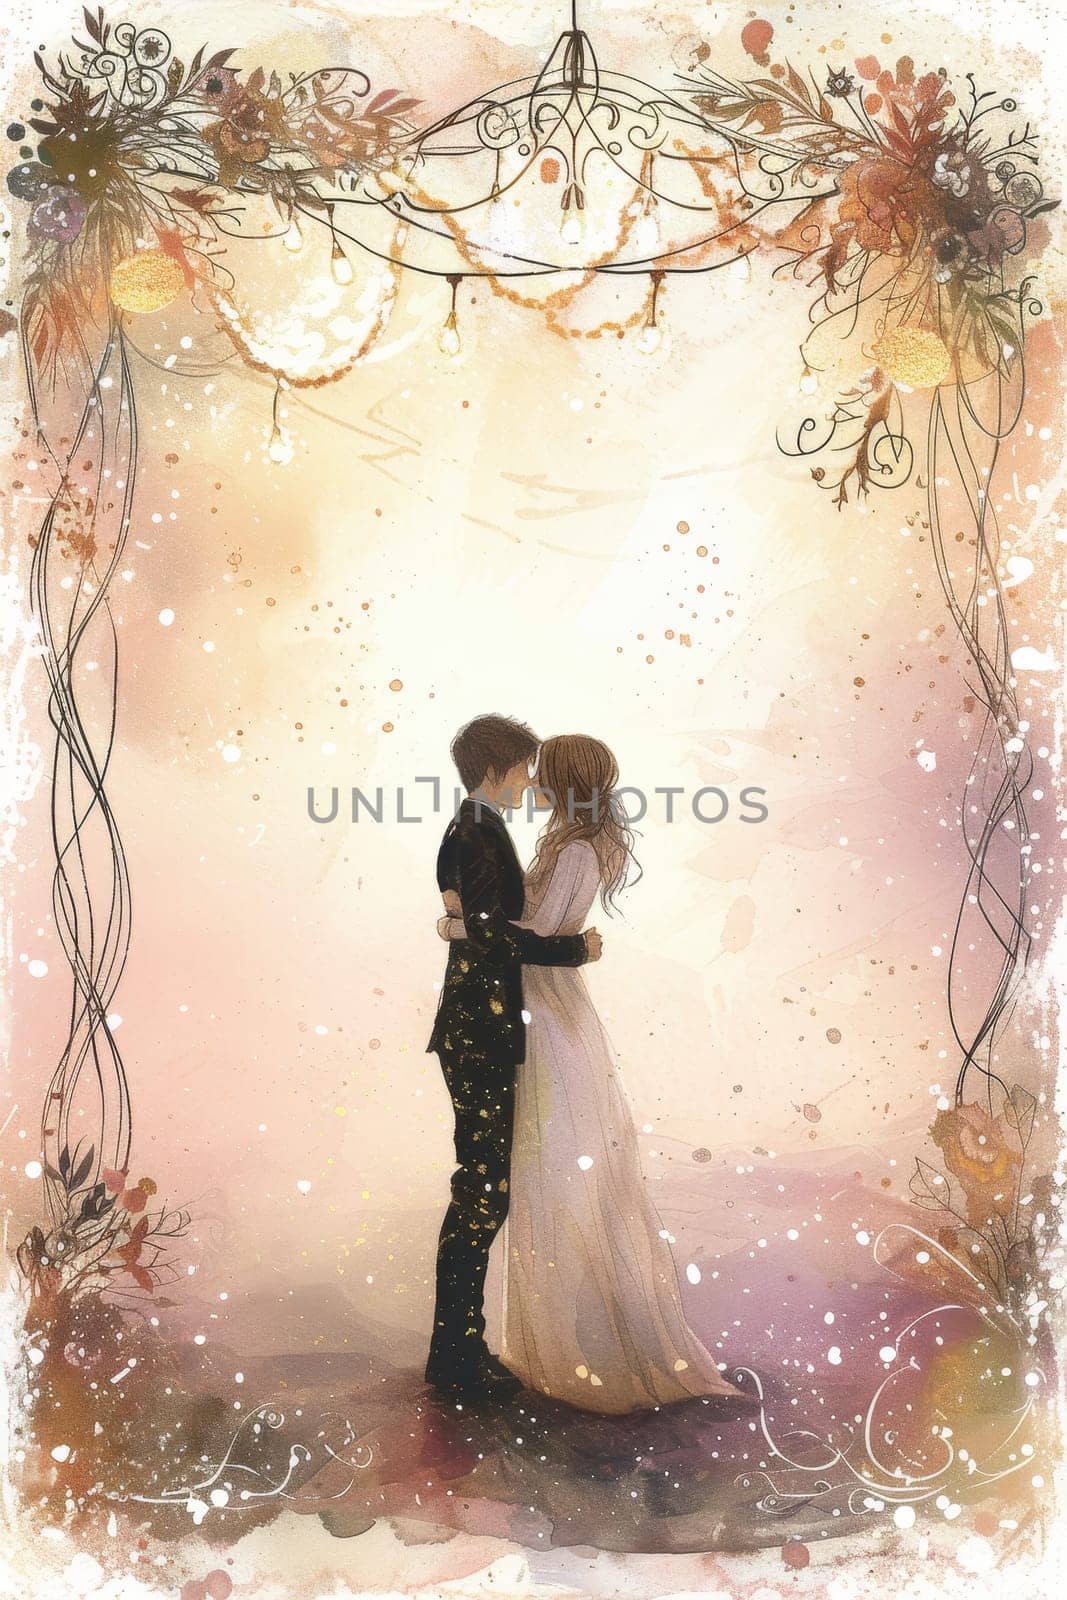 Silhouette of a couple embracing in a watercolor-inspired scene with whimsical florals. by sfinks